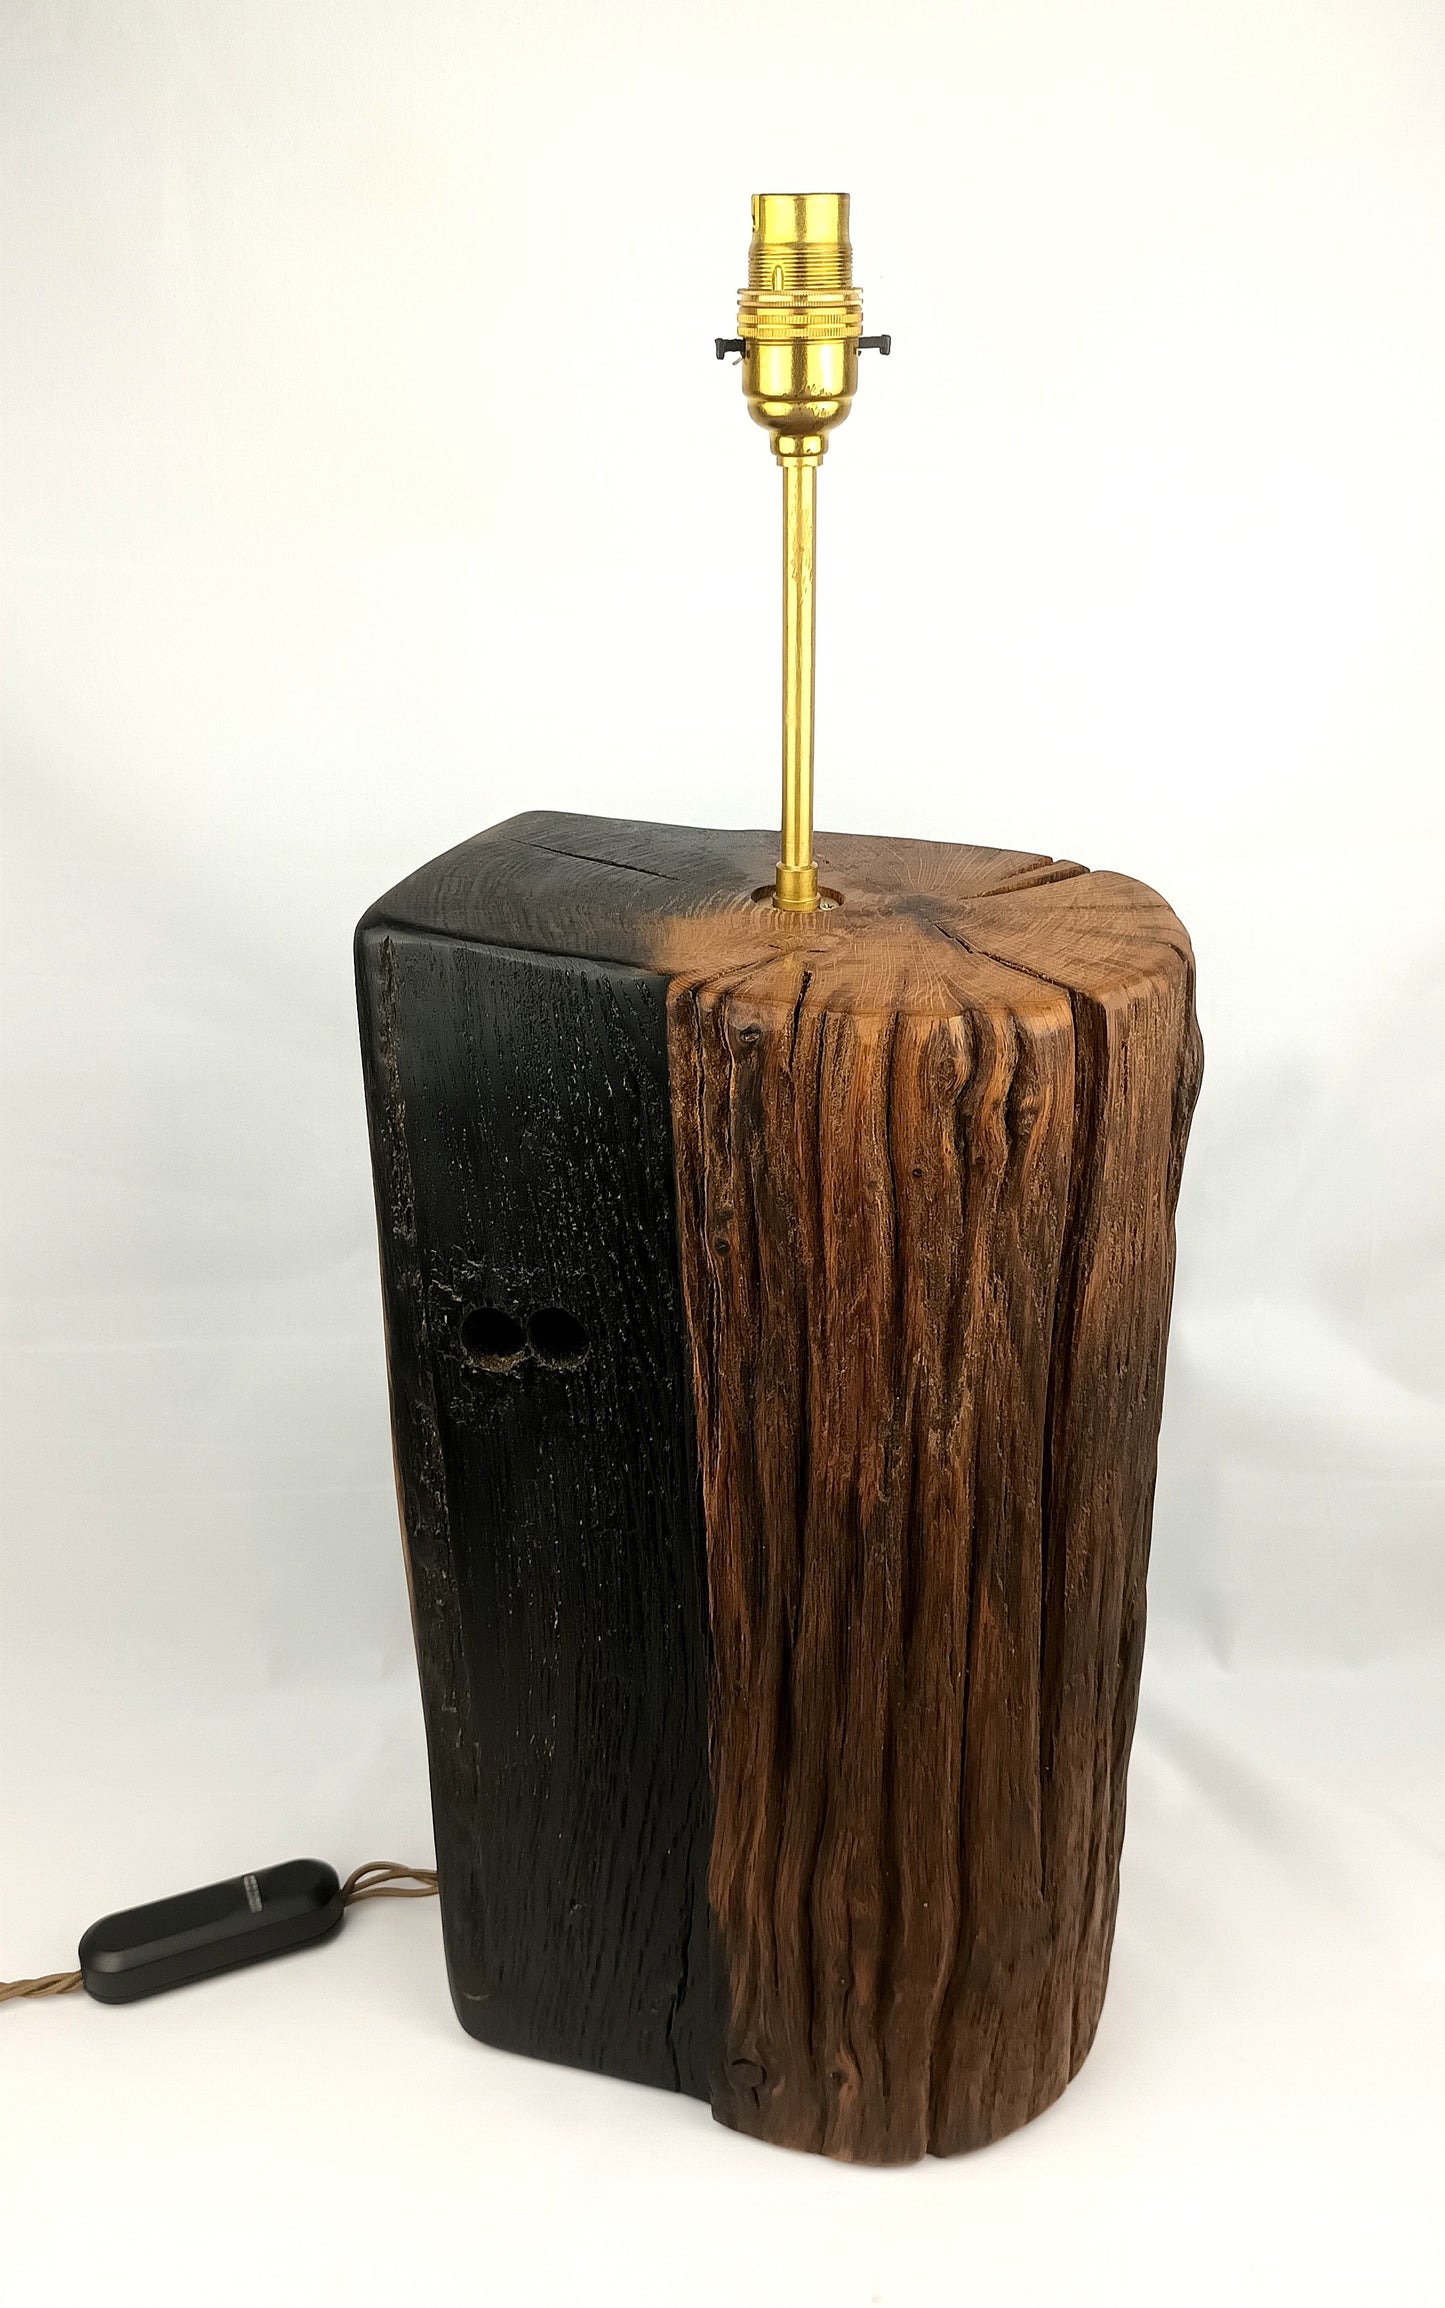 Oak Lamp Base - Salvaged Canal Lock Gate - One of a Kind